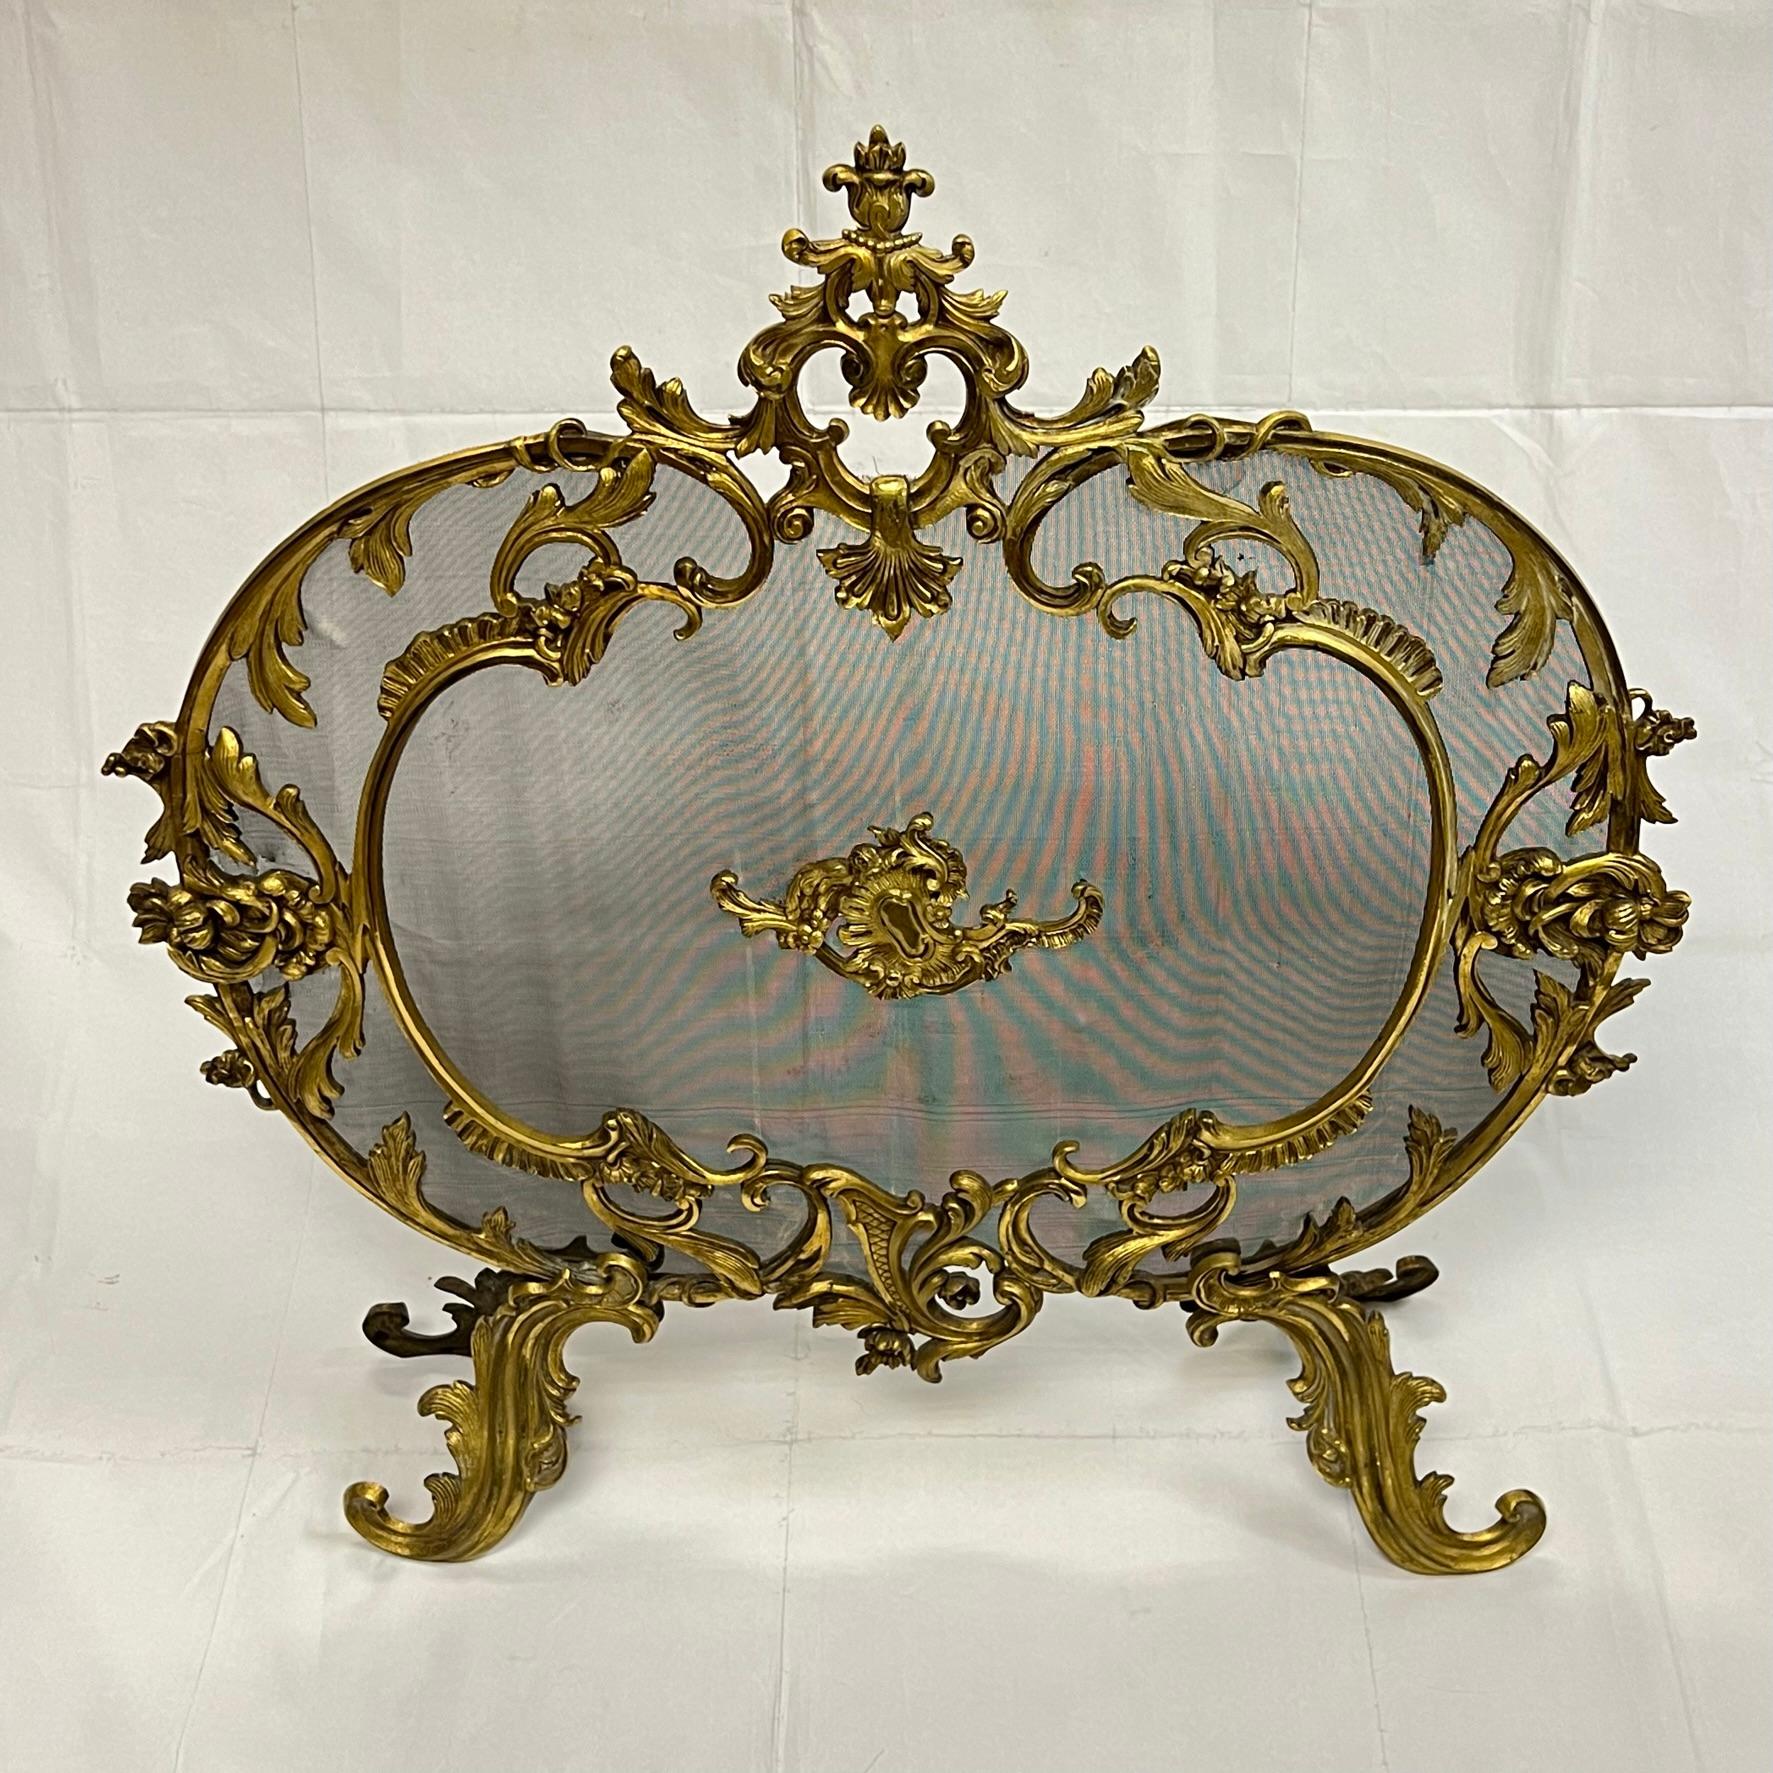 Antique French 19th century gilt bronze fireplace screen in Louis XV / XVI style.